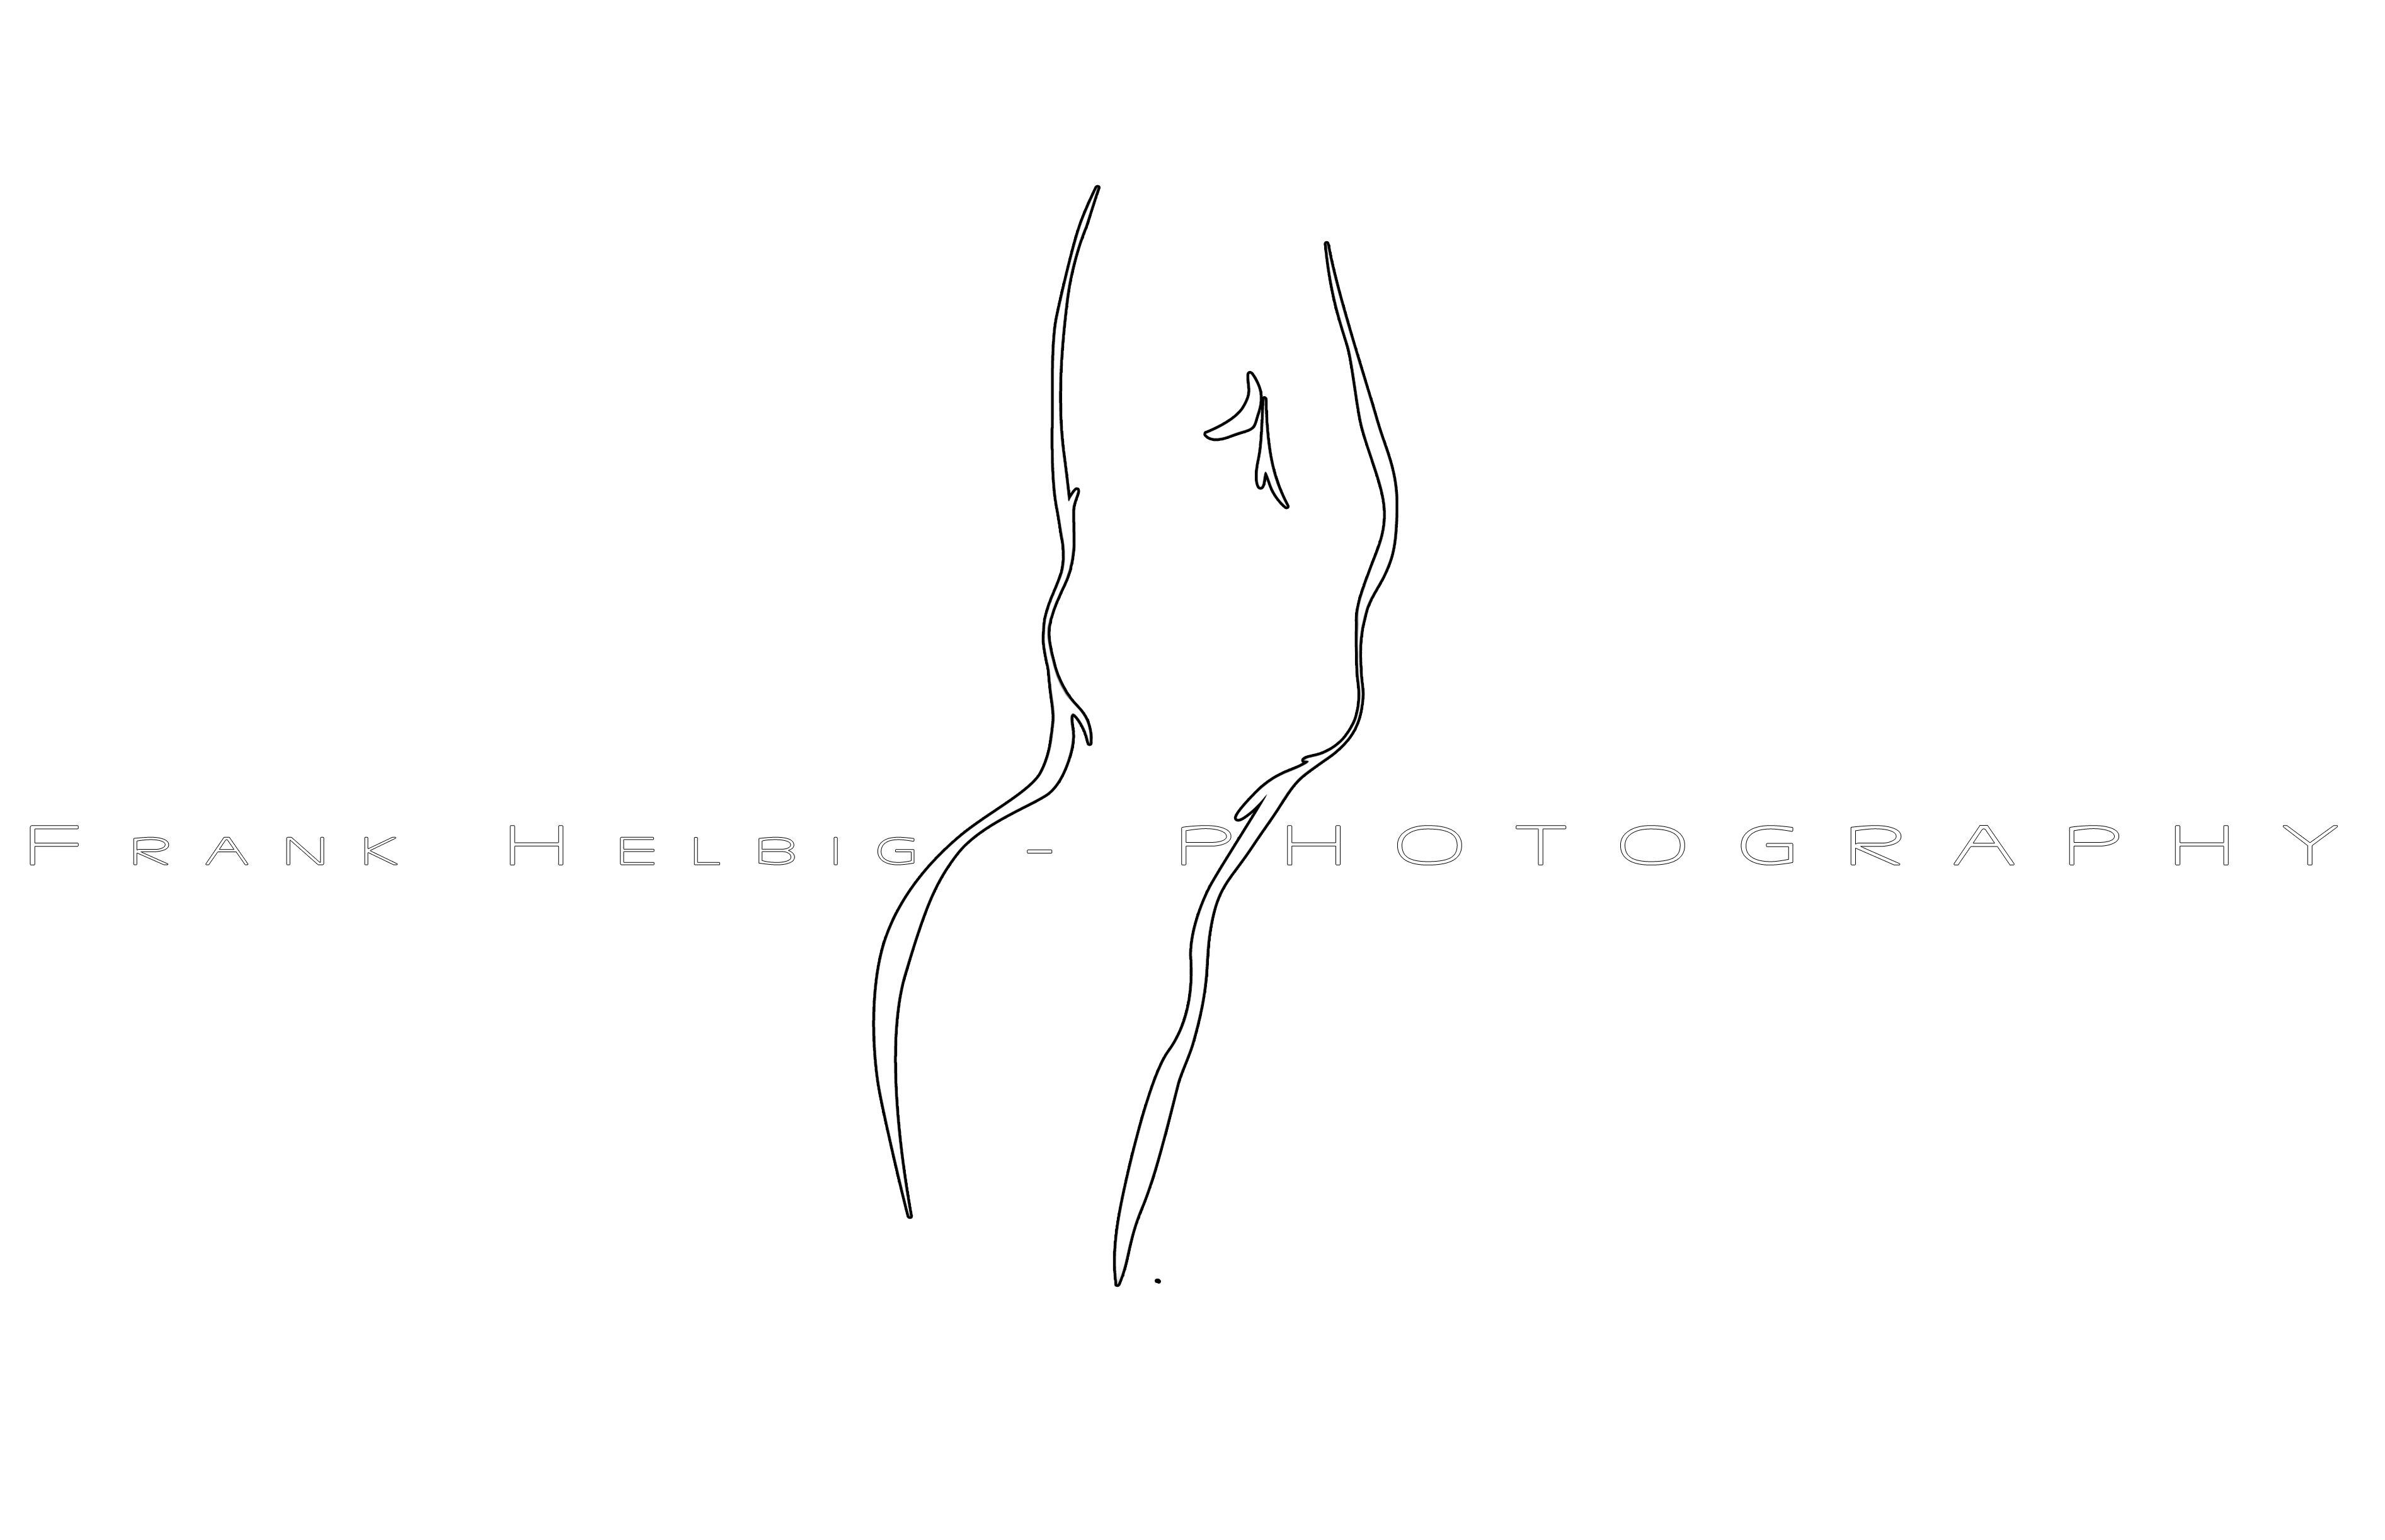 Frank Helbig - Photography